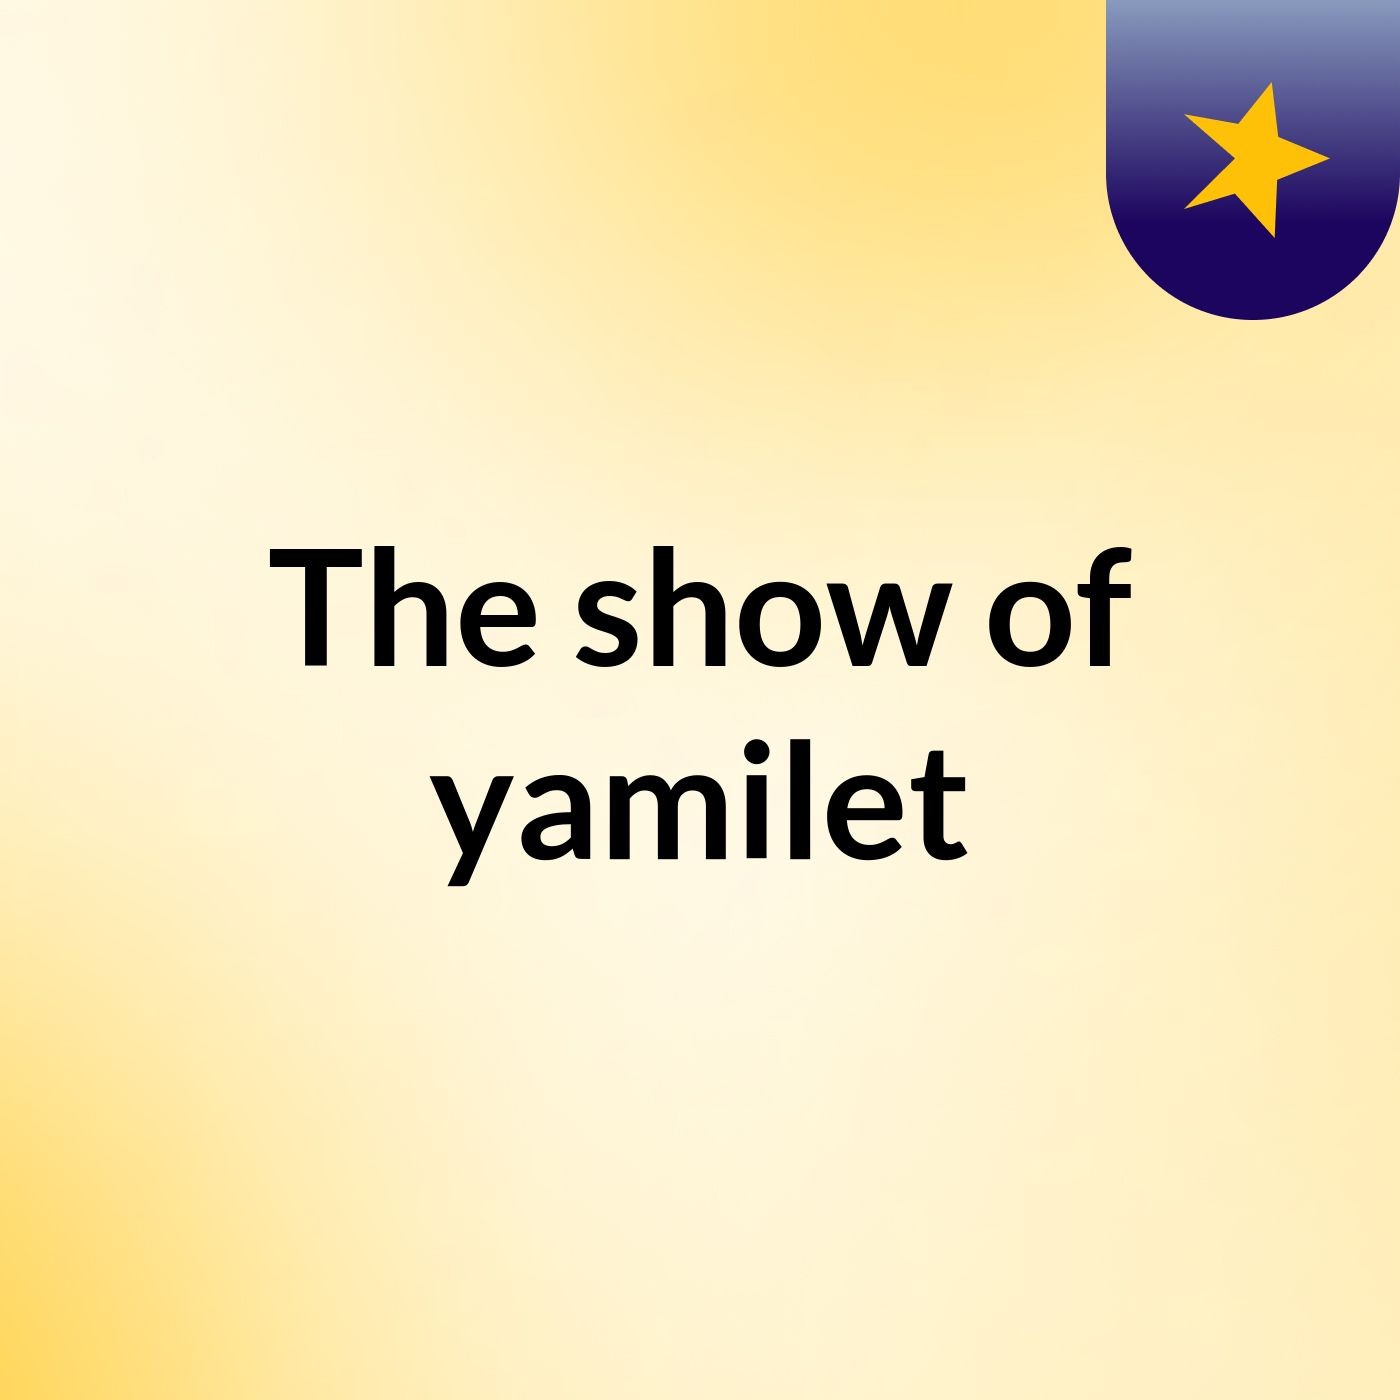 The show of yamilet